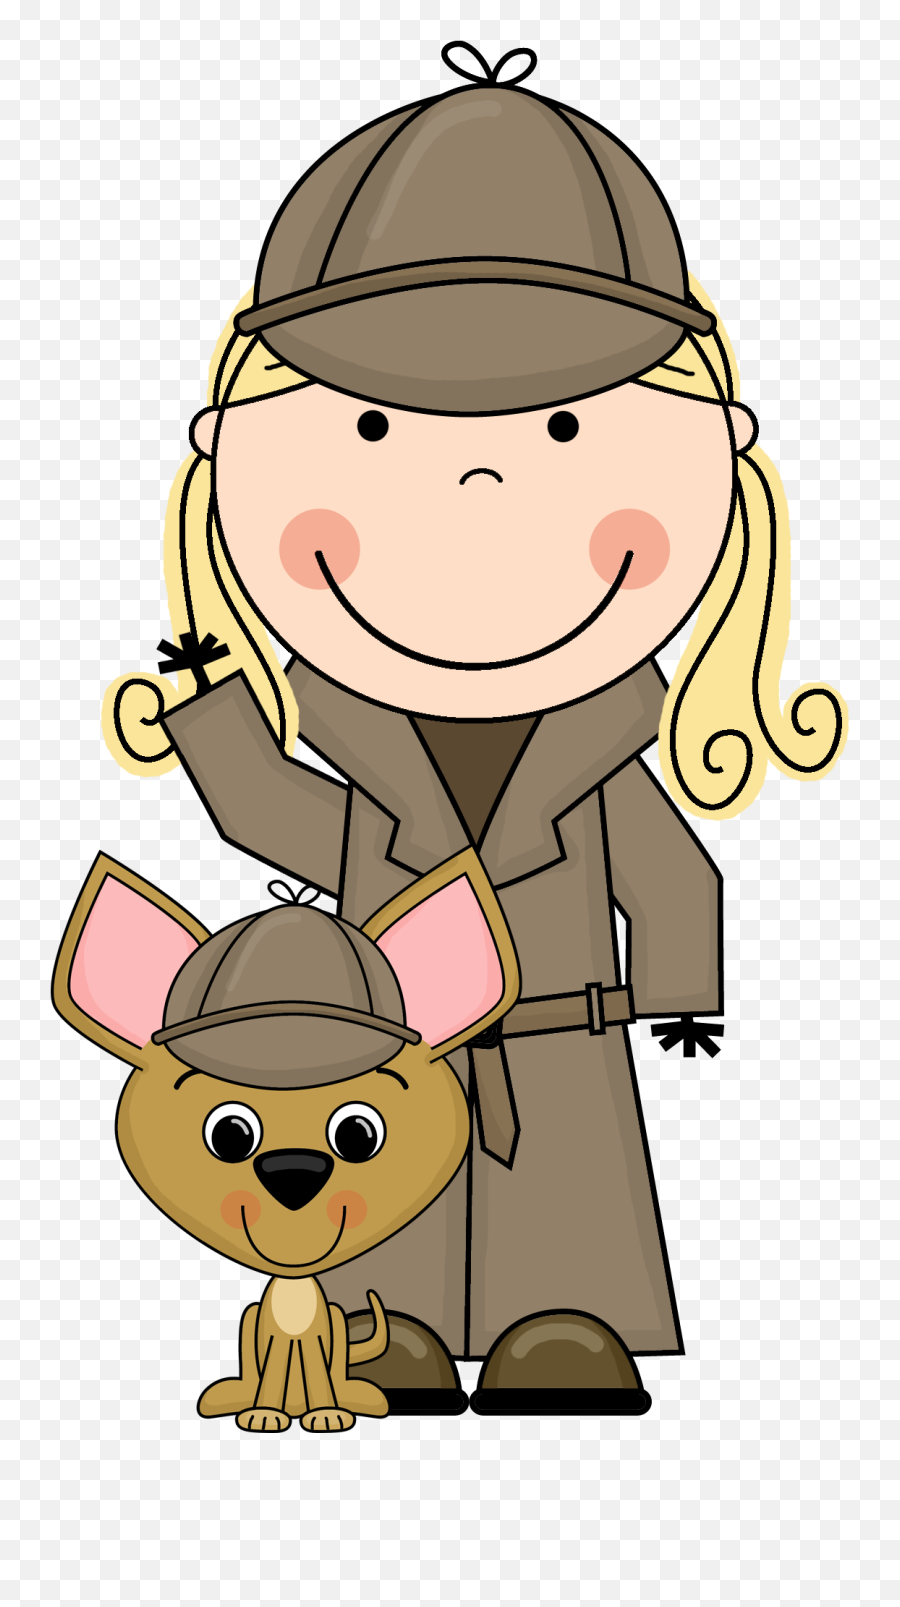 Kid Detective Clipart Free Images 3 Image - Clipartbarn Kid Detective Clipart Emoji,Free Clipart For Commercial Use